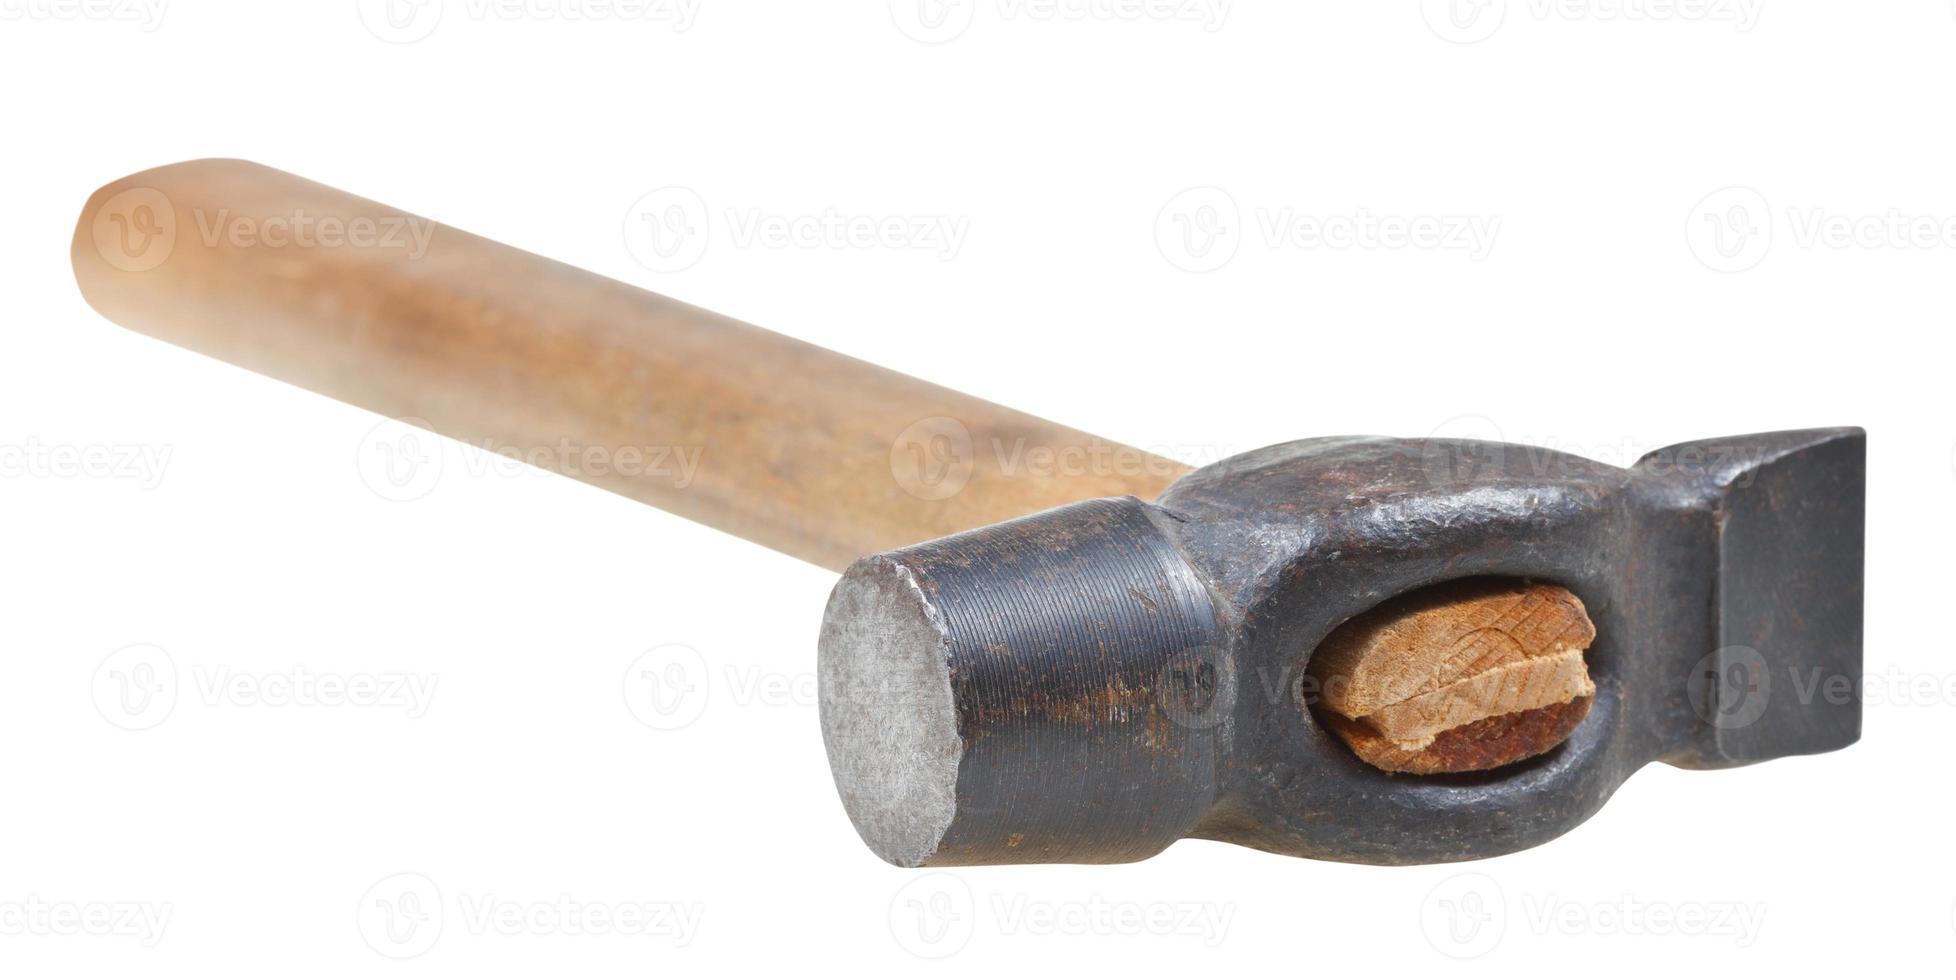 head of Cross Peen Hammer with round face close up photo